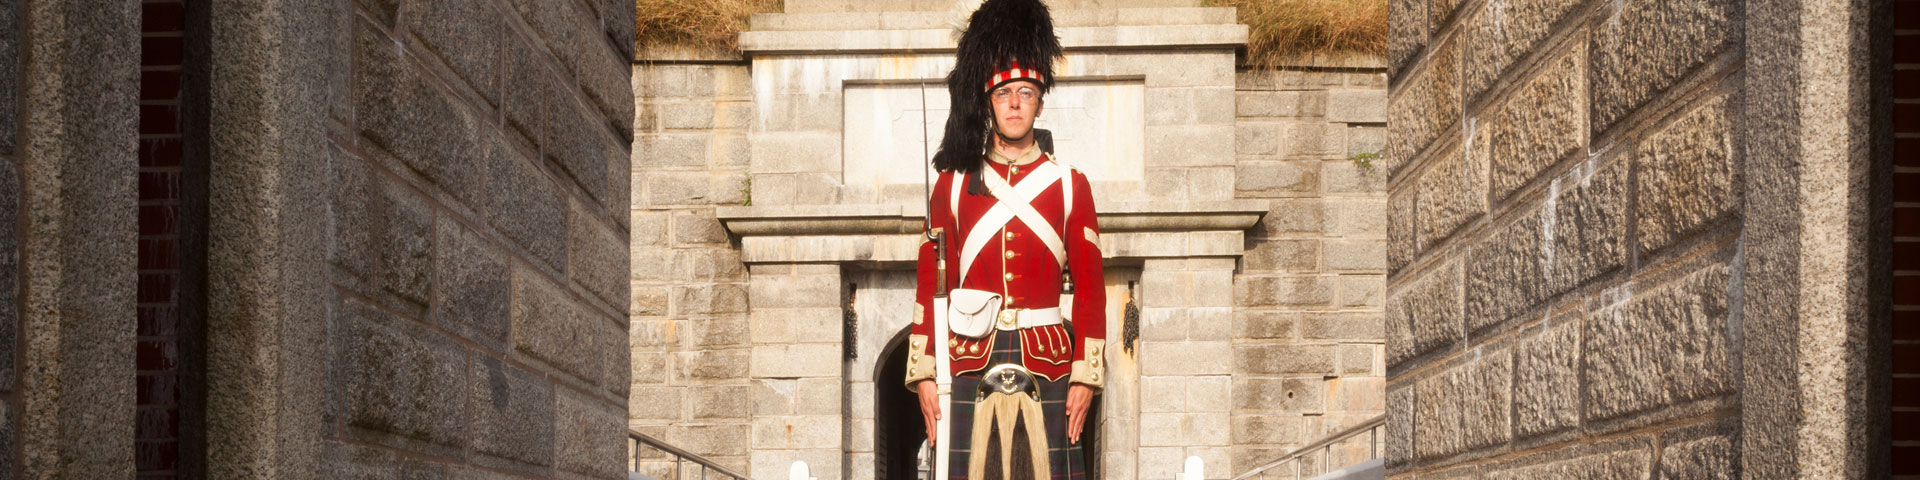 A soldier in full 78th Highlander uniform holds a rifle and stands next to the wall.